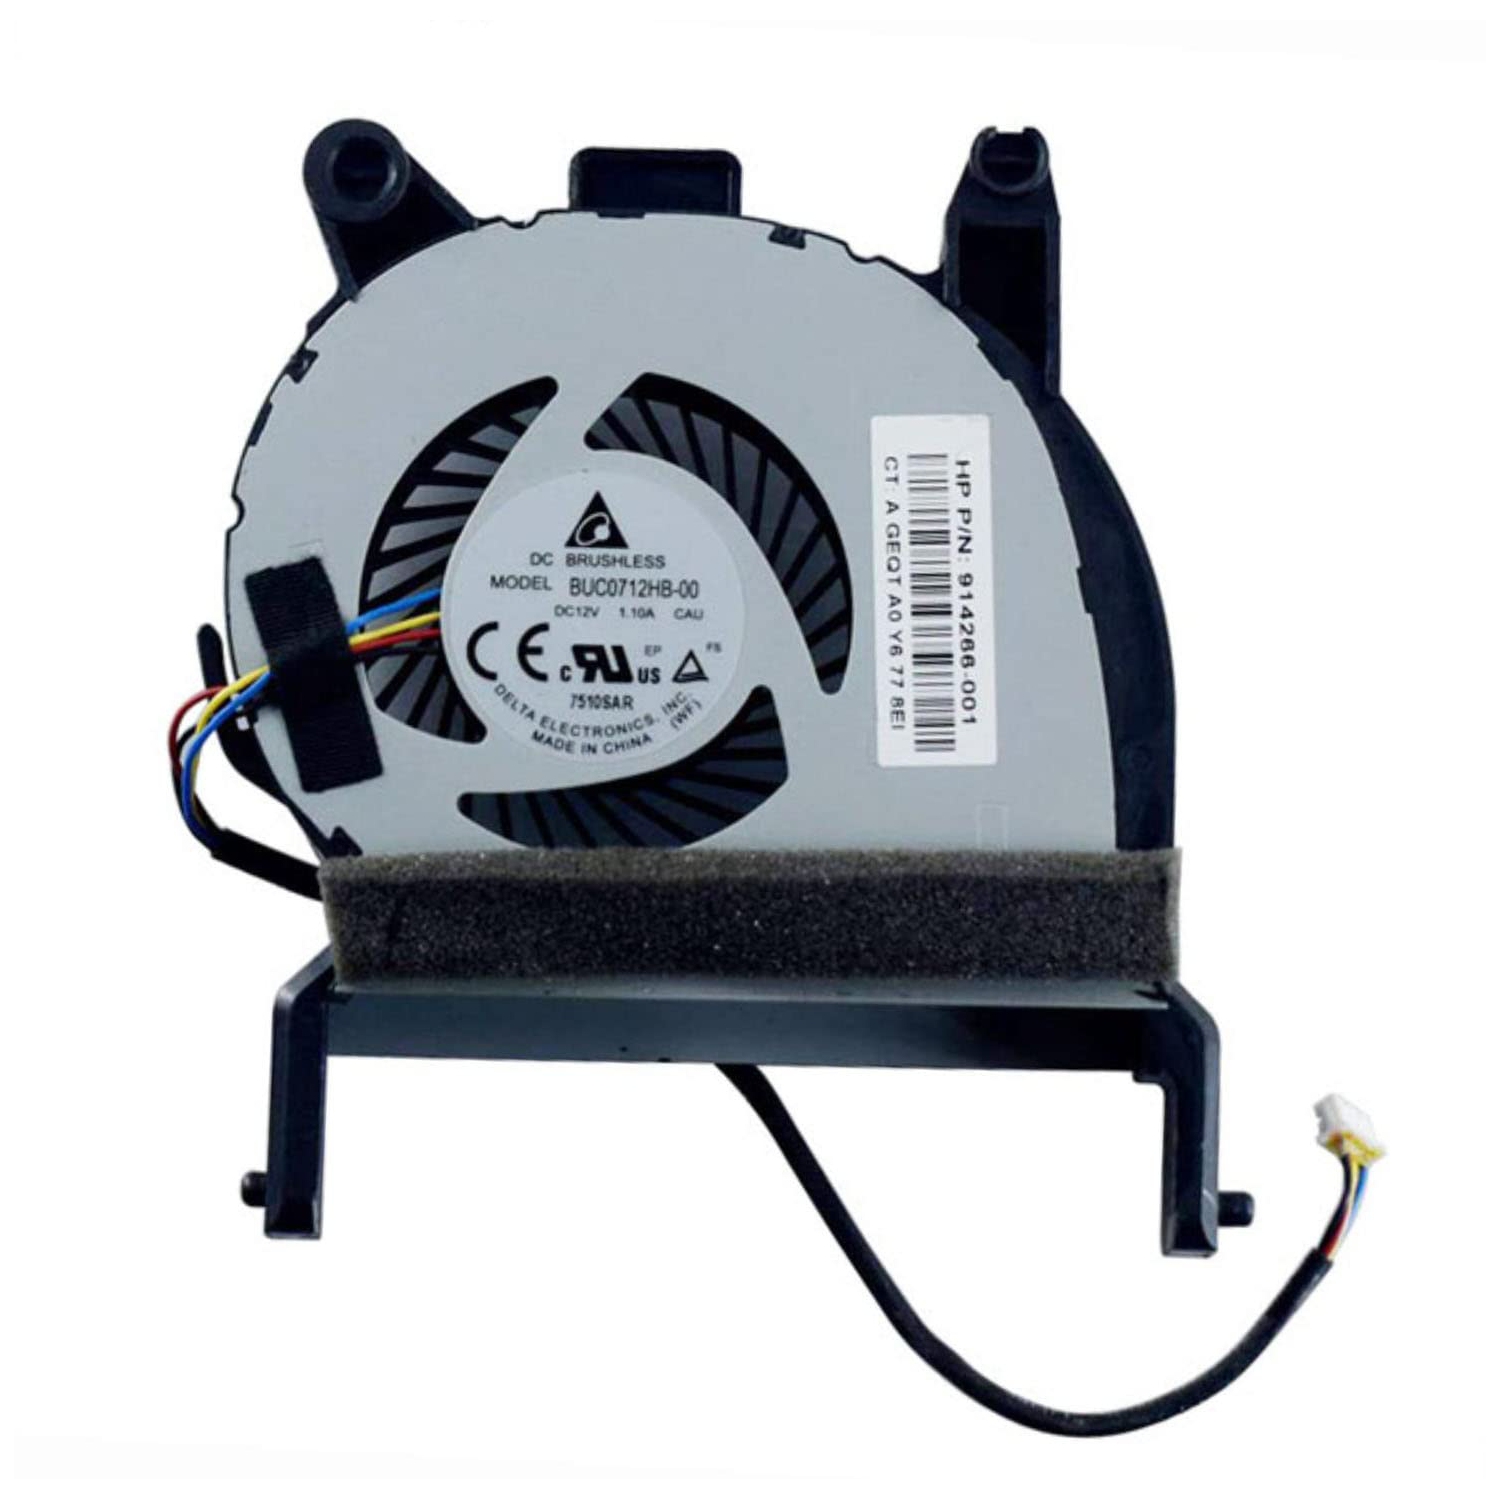 New CPU Cooling Fan Replacement for HP ProDesk Mini 600 G3 400 G3 Series BUC0712HB-00 914266-001